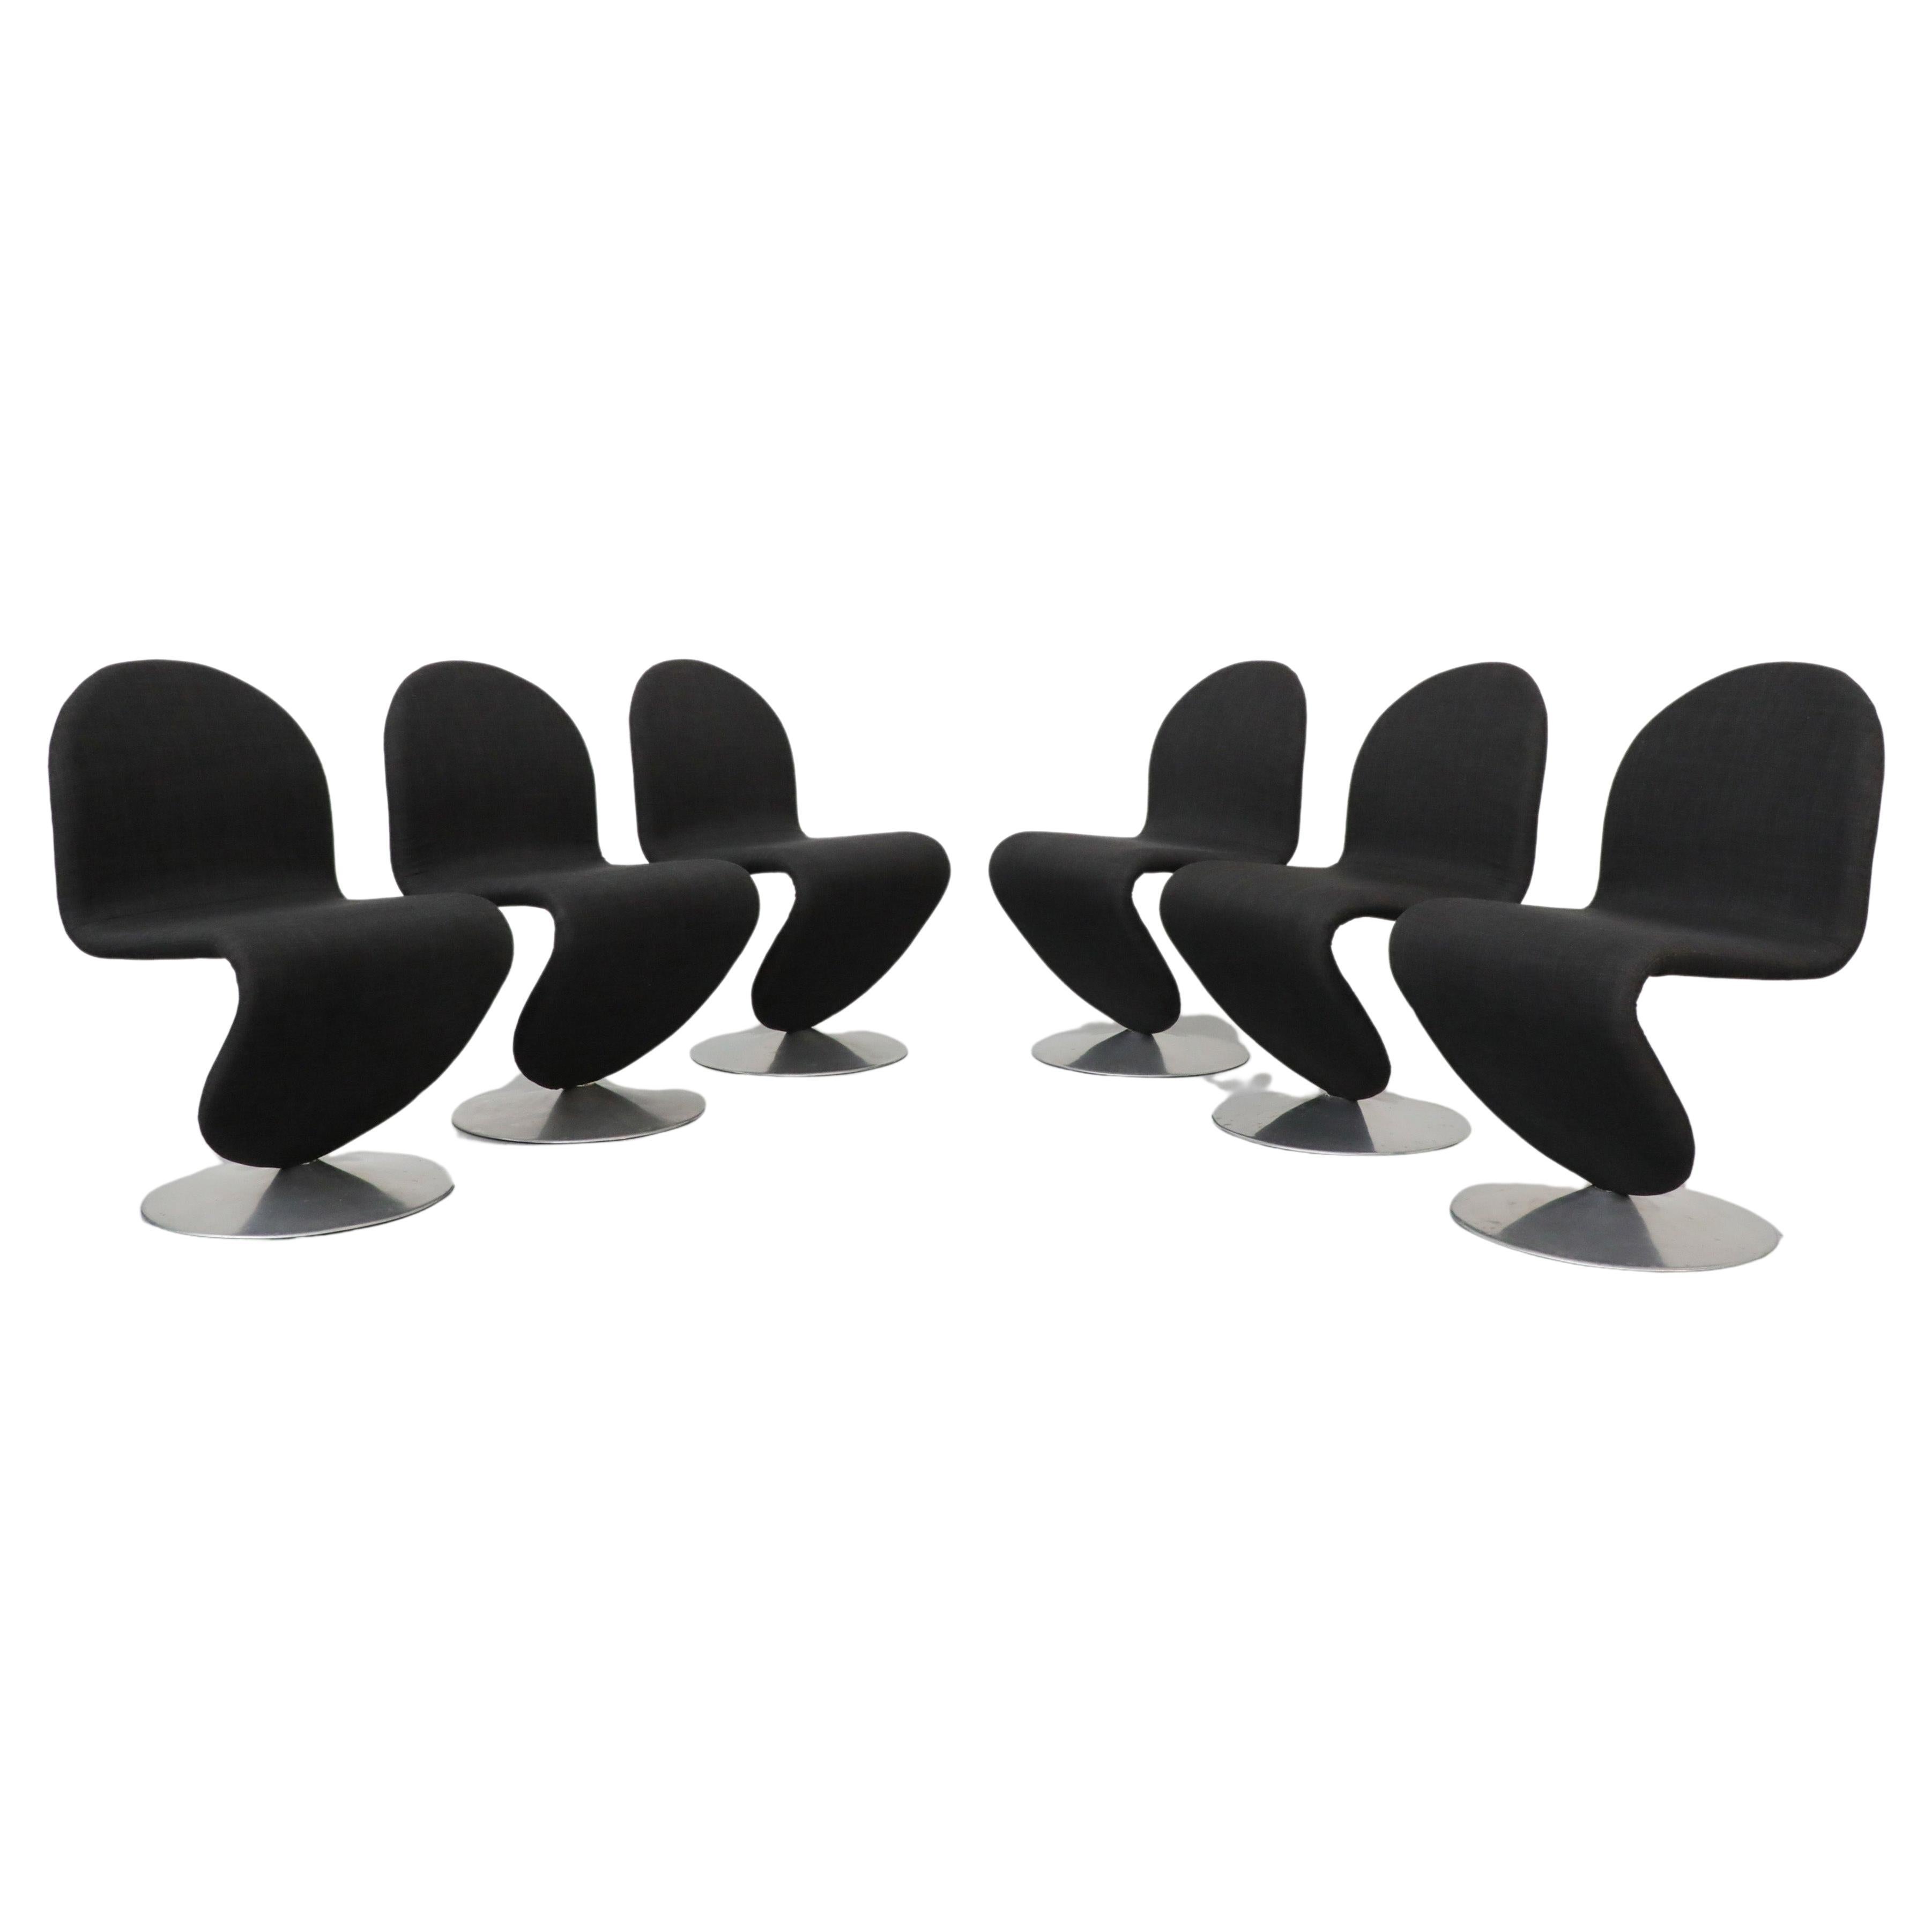 Set of 6 Black 1980s 1-2-3 Series Dining Chairs by Verner Panton for Rosenthal